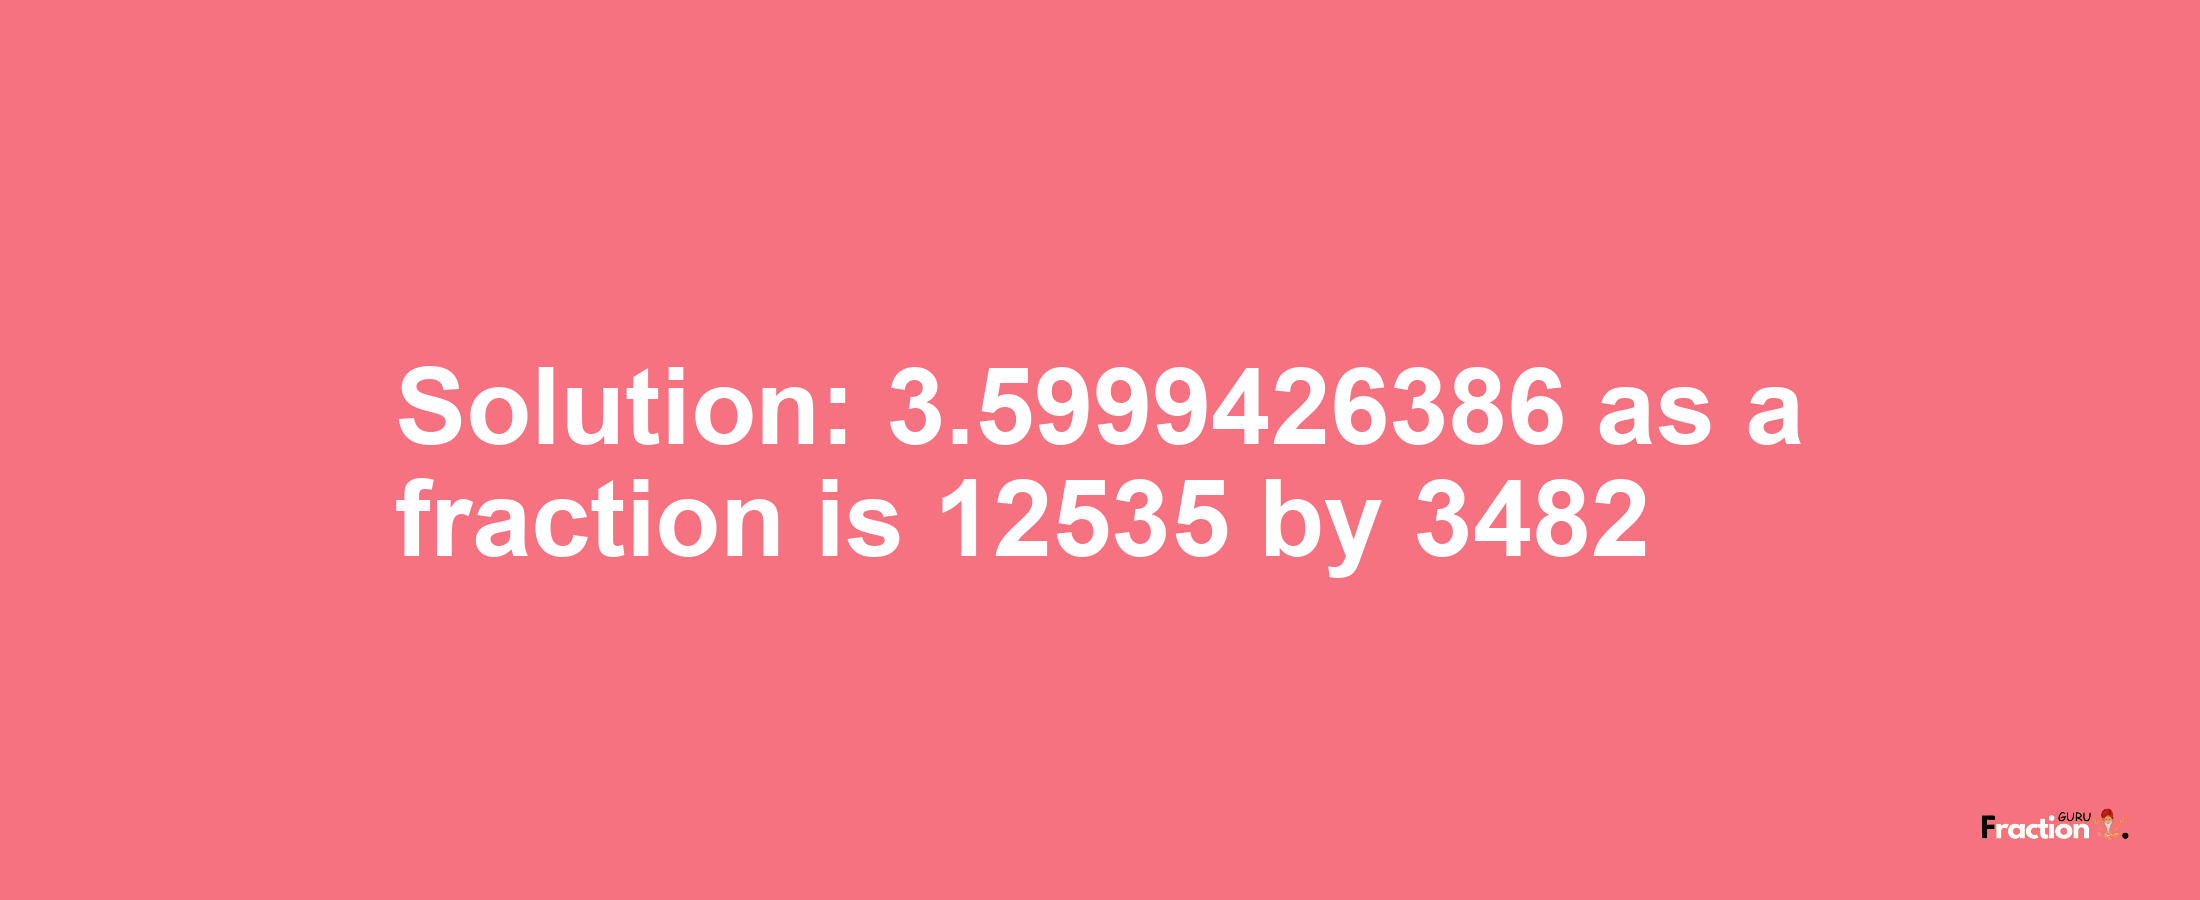 Solution:3.5999426386 as a fraction is 12535/3482